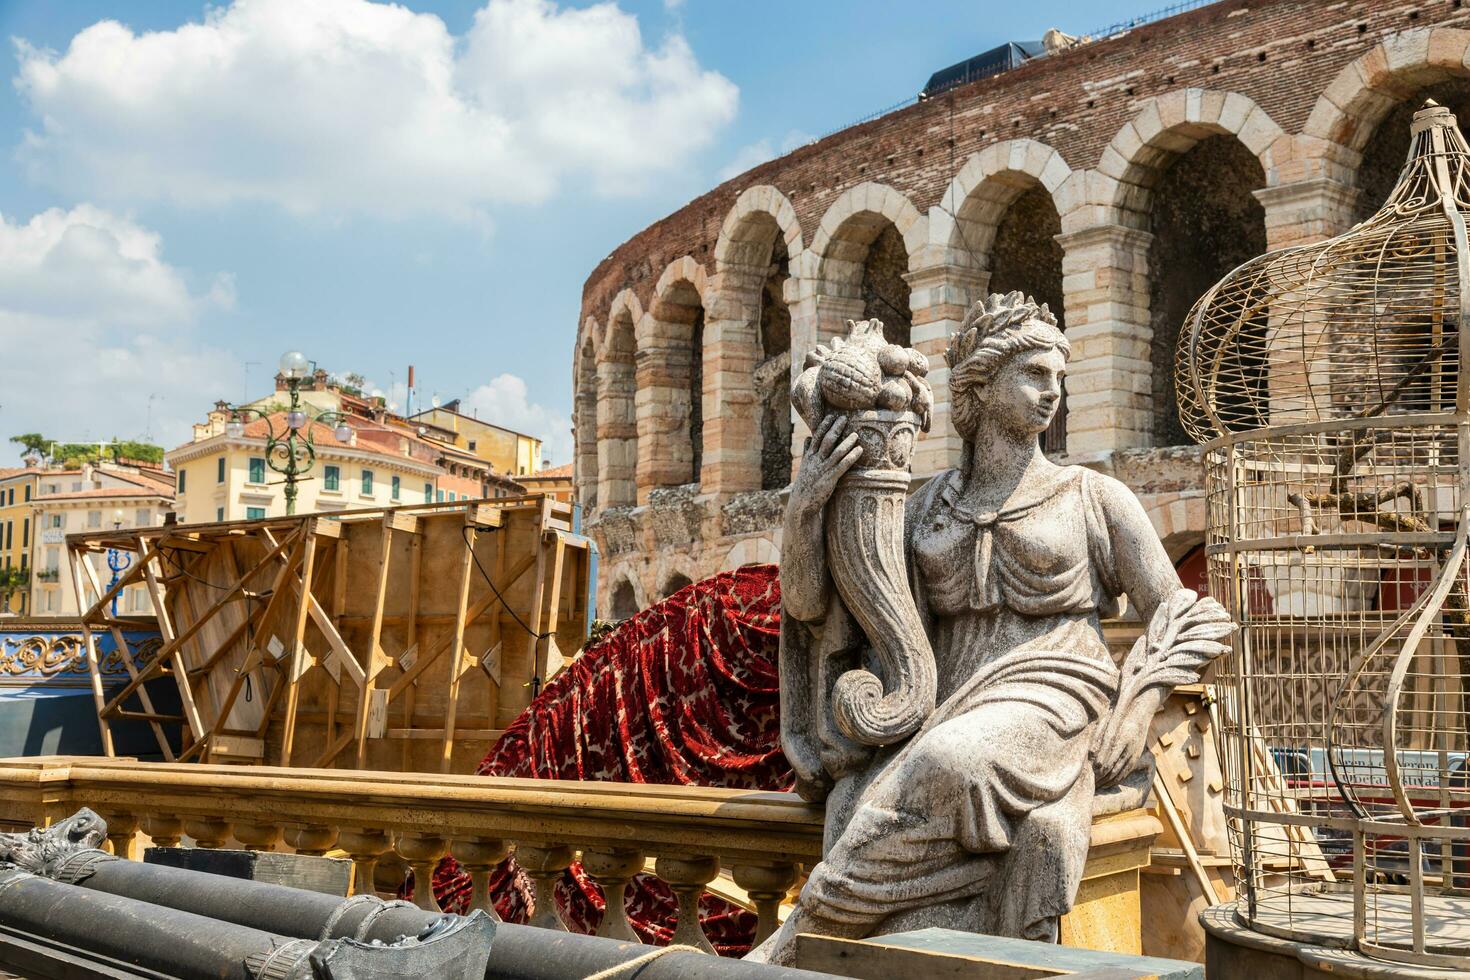 Verona, Italy - preparing the stage for the thetre performance in the famous Arena di Verona photo